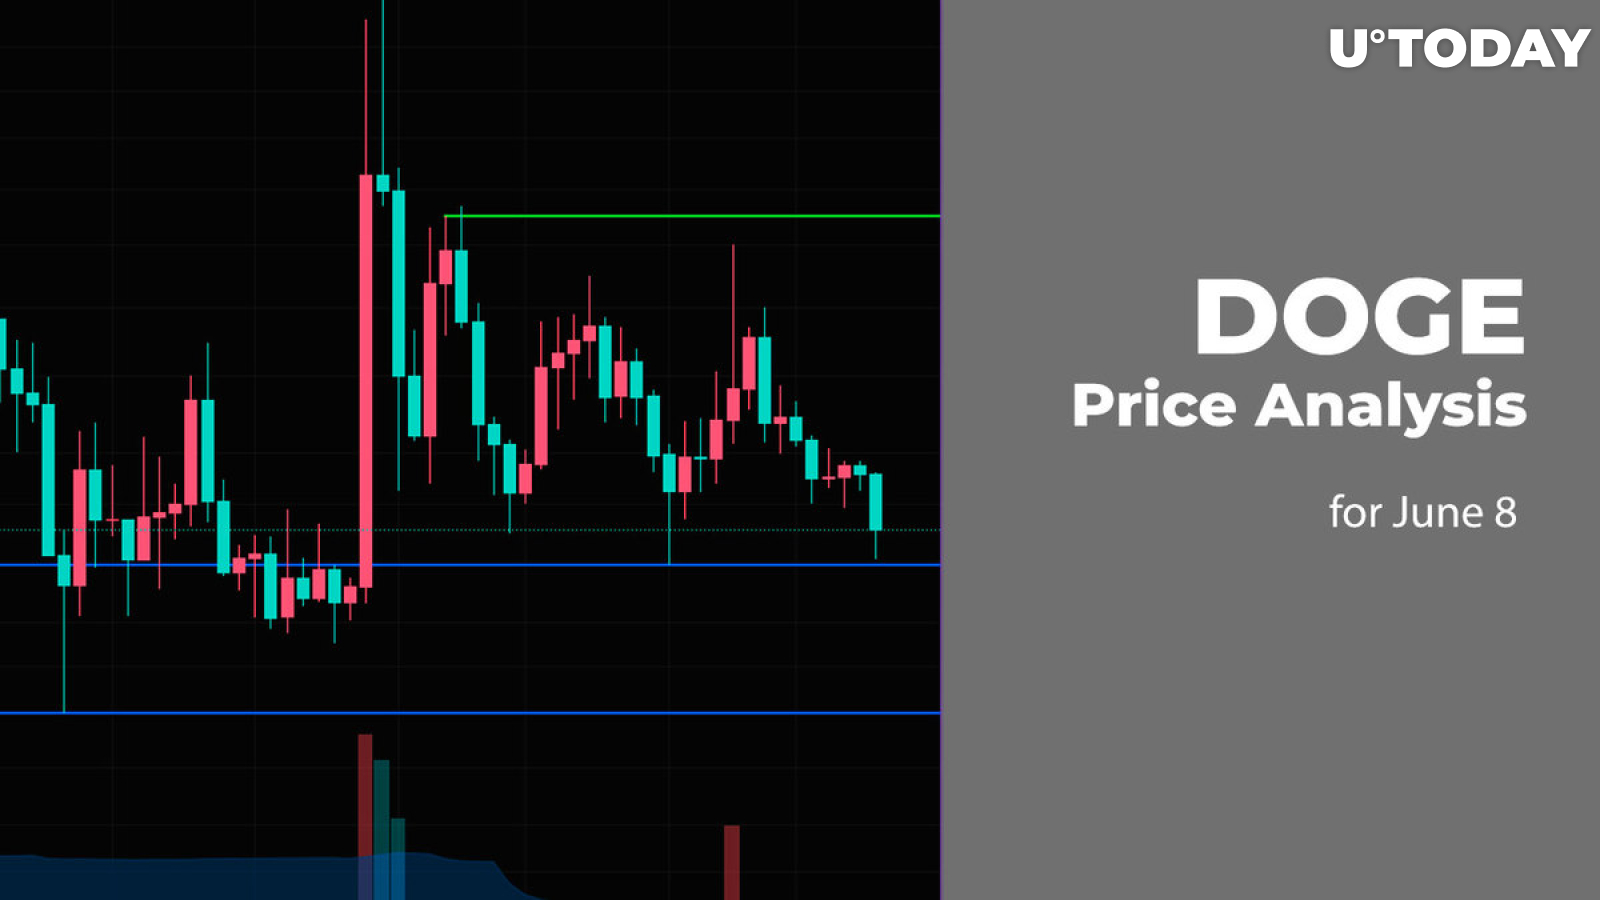 DOGE Price Analysis for June 8